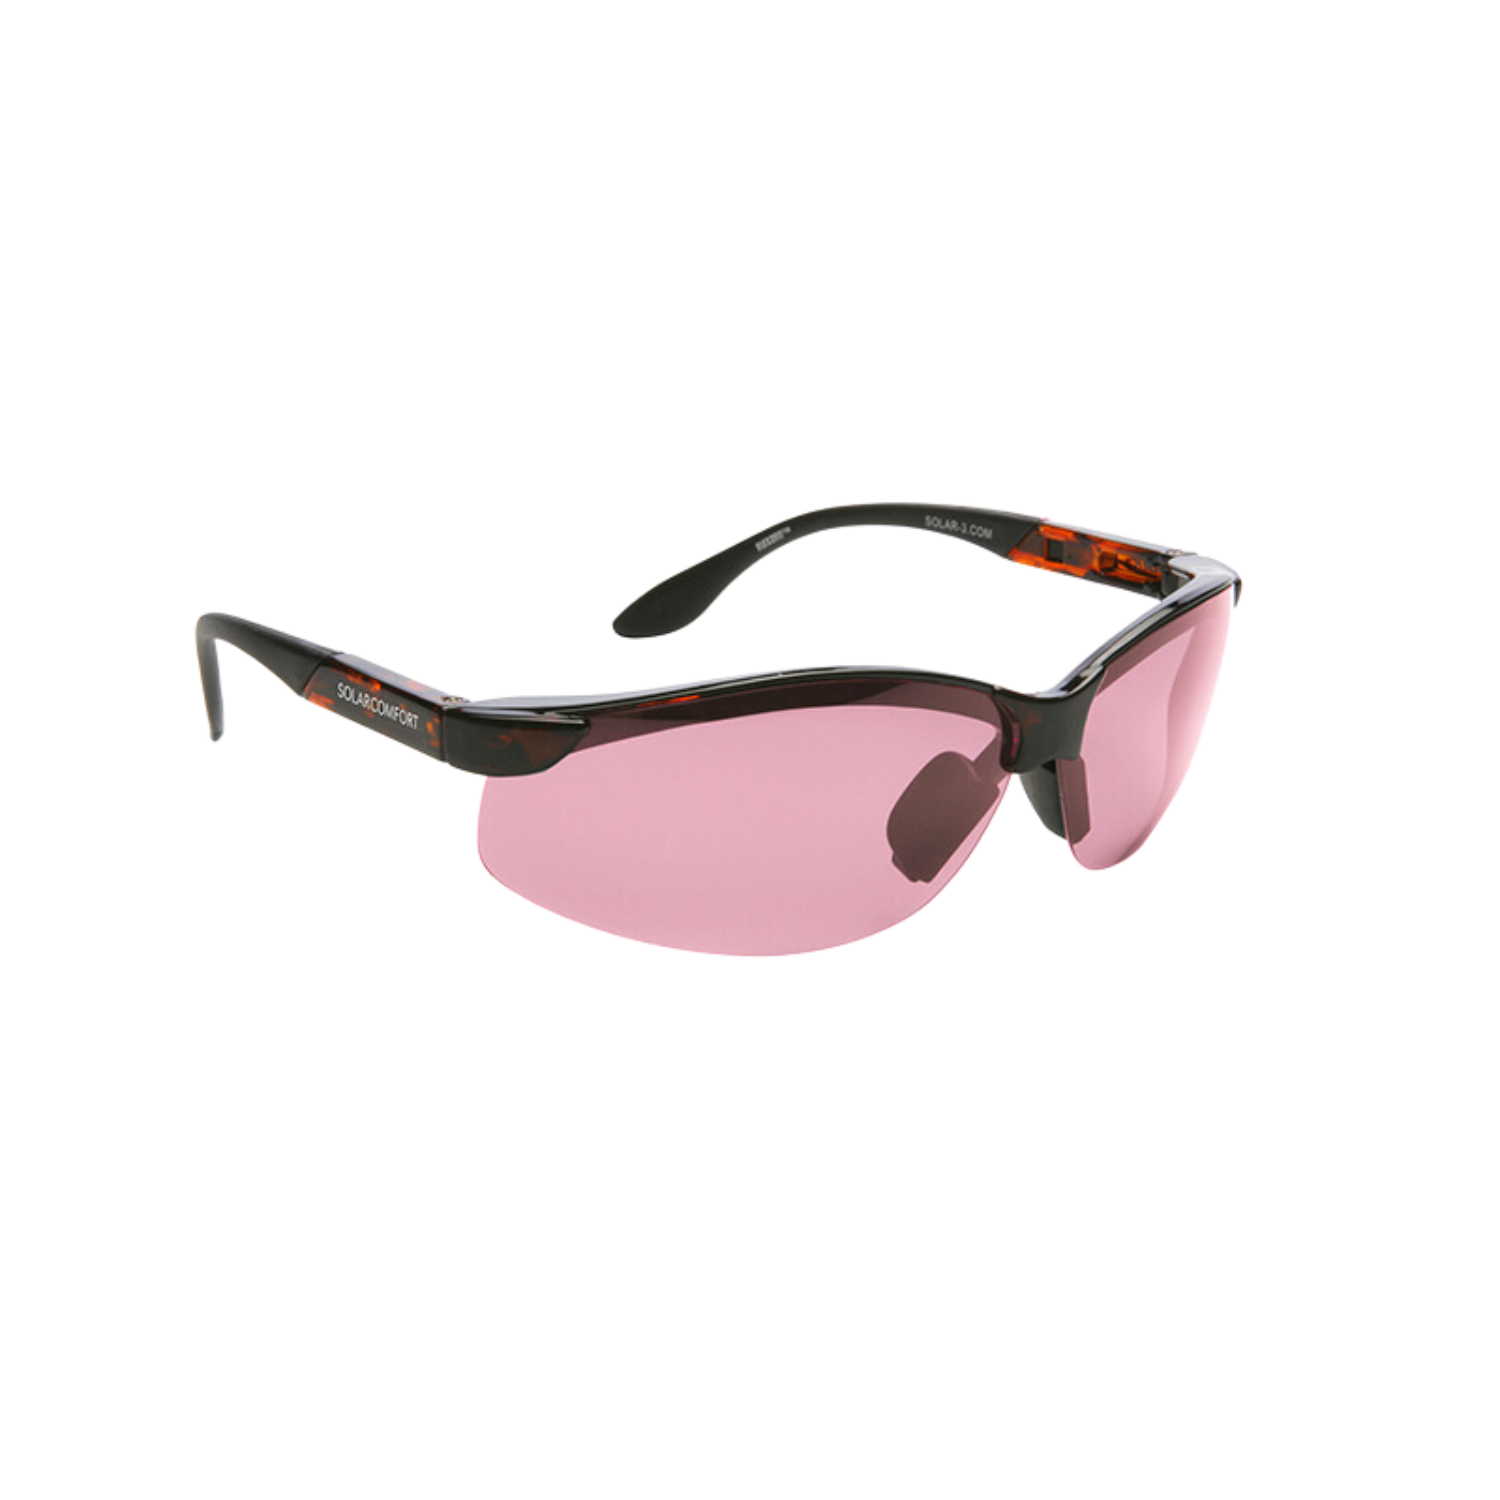 Image of the SolarComfort FL-41 light sensitivity glasses from Eschenbach with light rose tint filters.